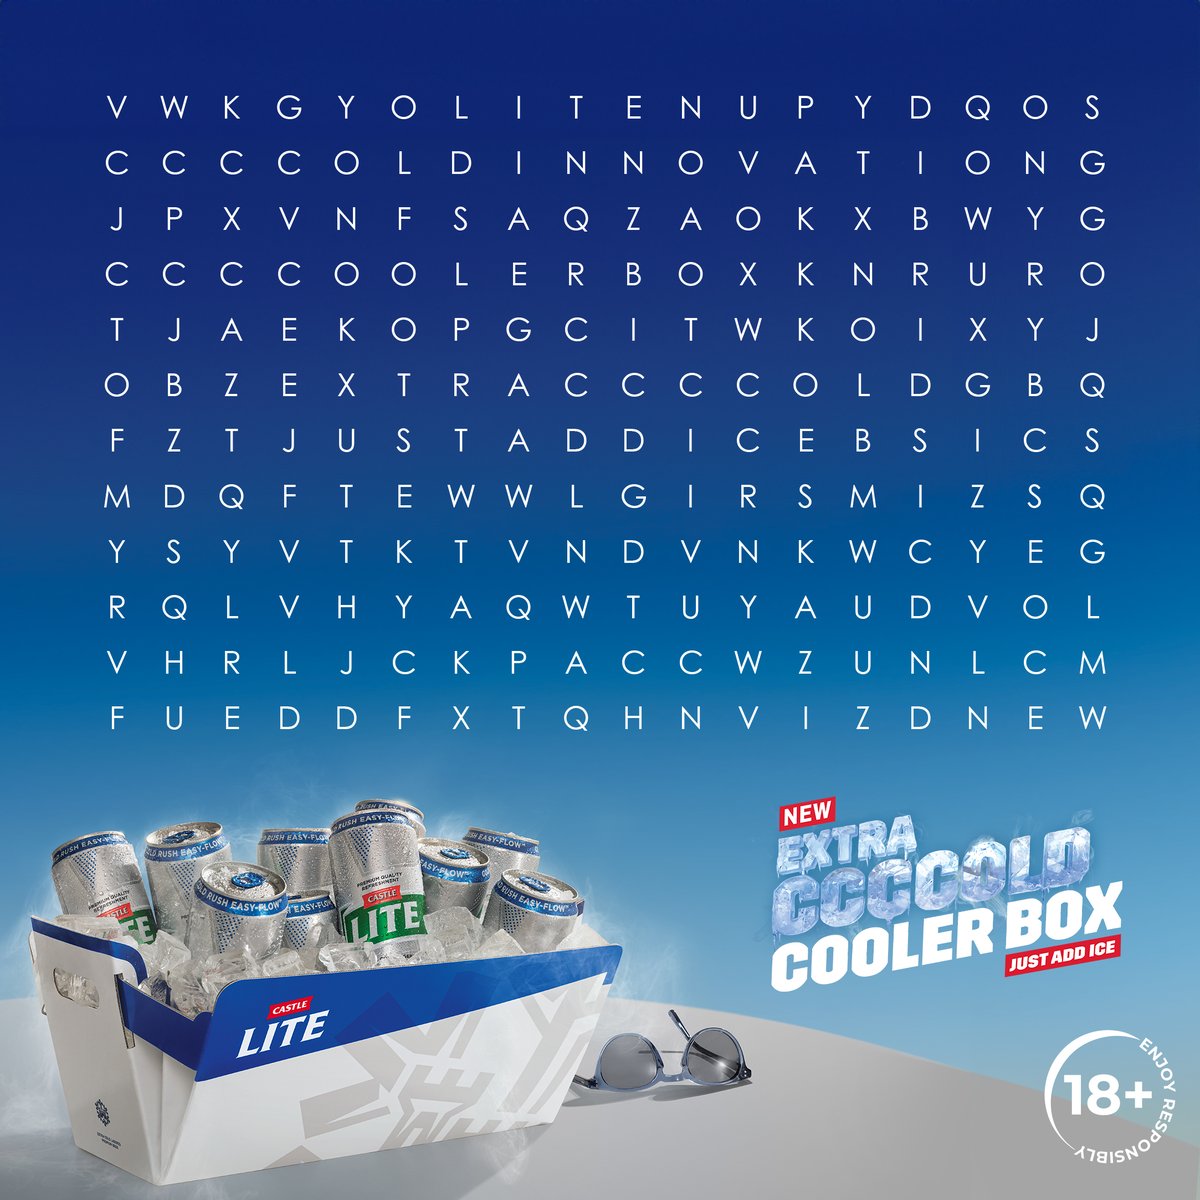 Fede, Magenge? Mampara week may have you down mara sawara, we’ve got you. 😌 Comment with the first 3 phrases you see using #ExtraCCCCold 🧊 and you could win something CCCCold in your DMs. ❄️